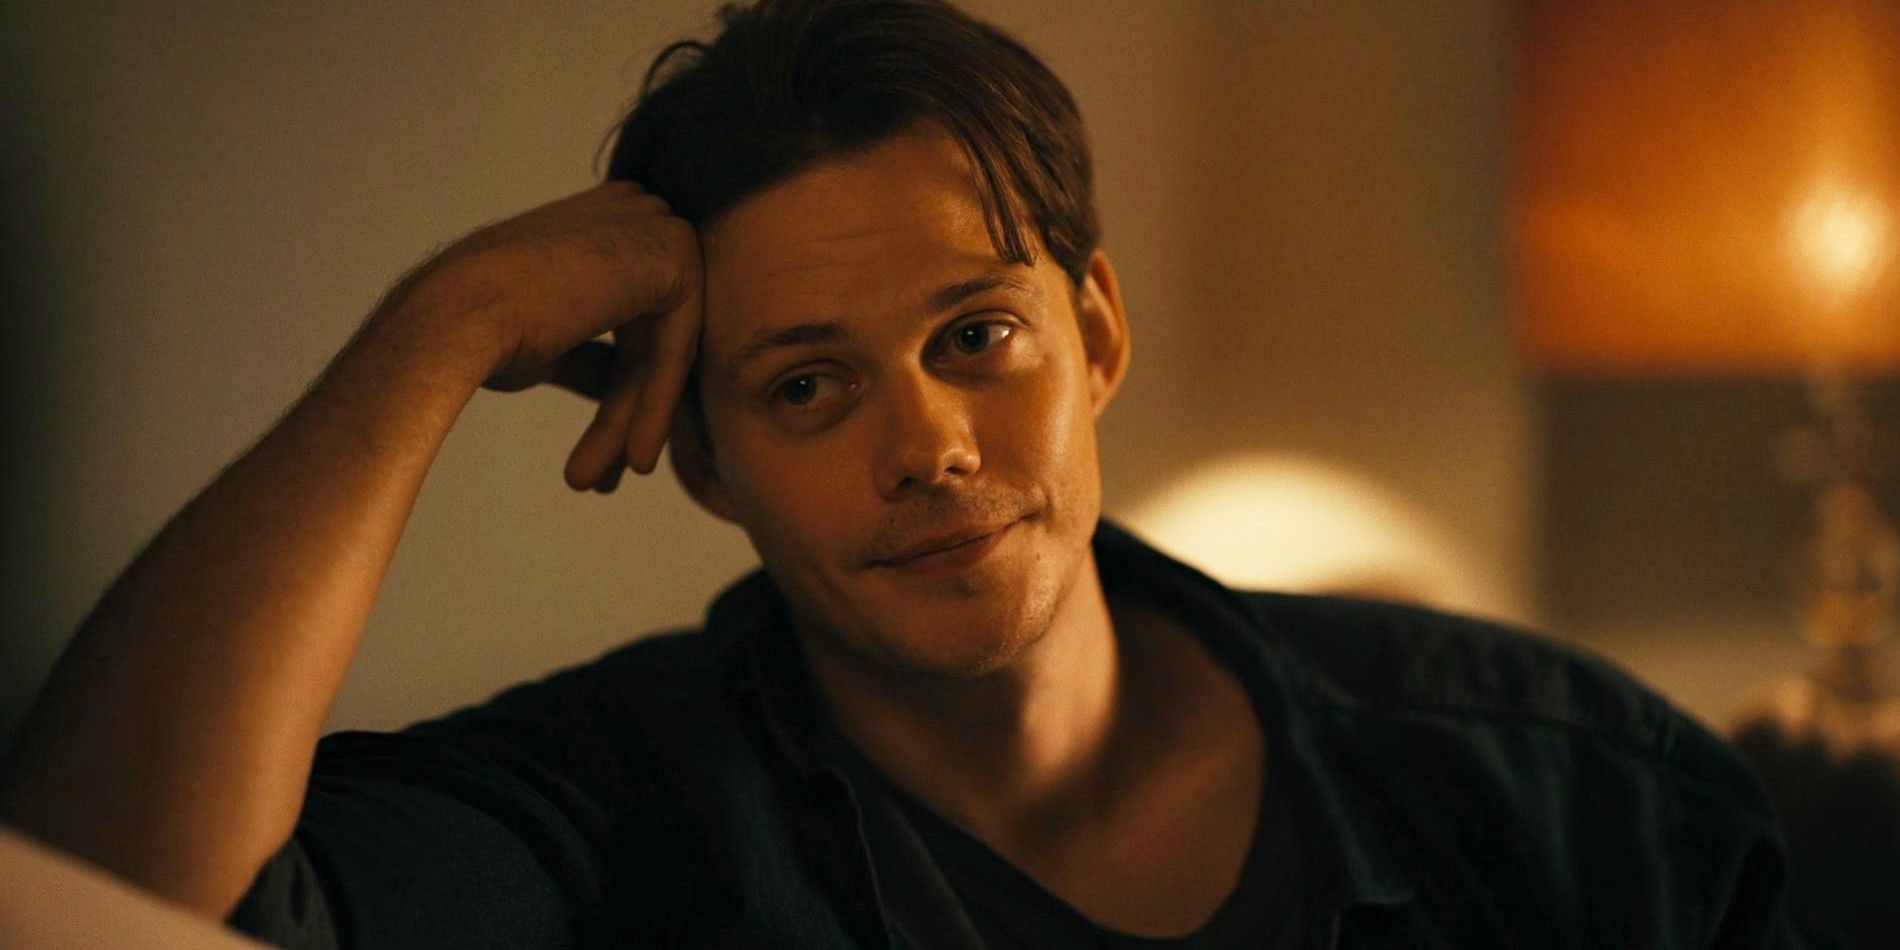 Bill Skarsgard in Barbarian smiling while sitting on the couch